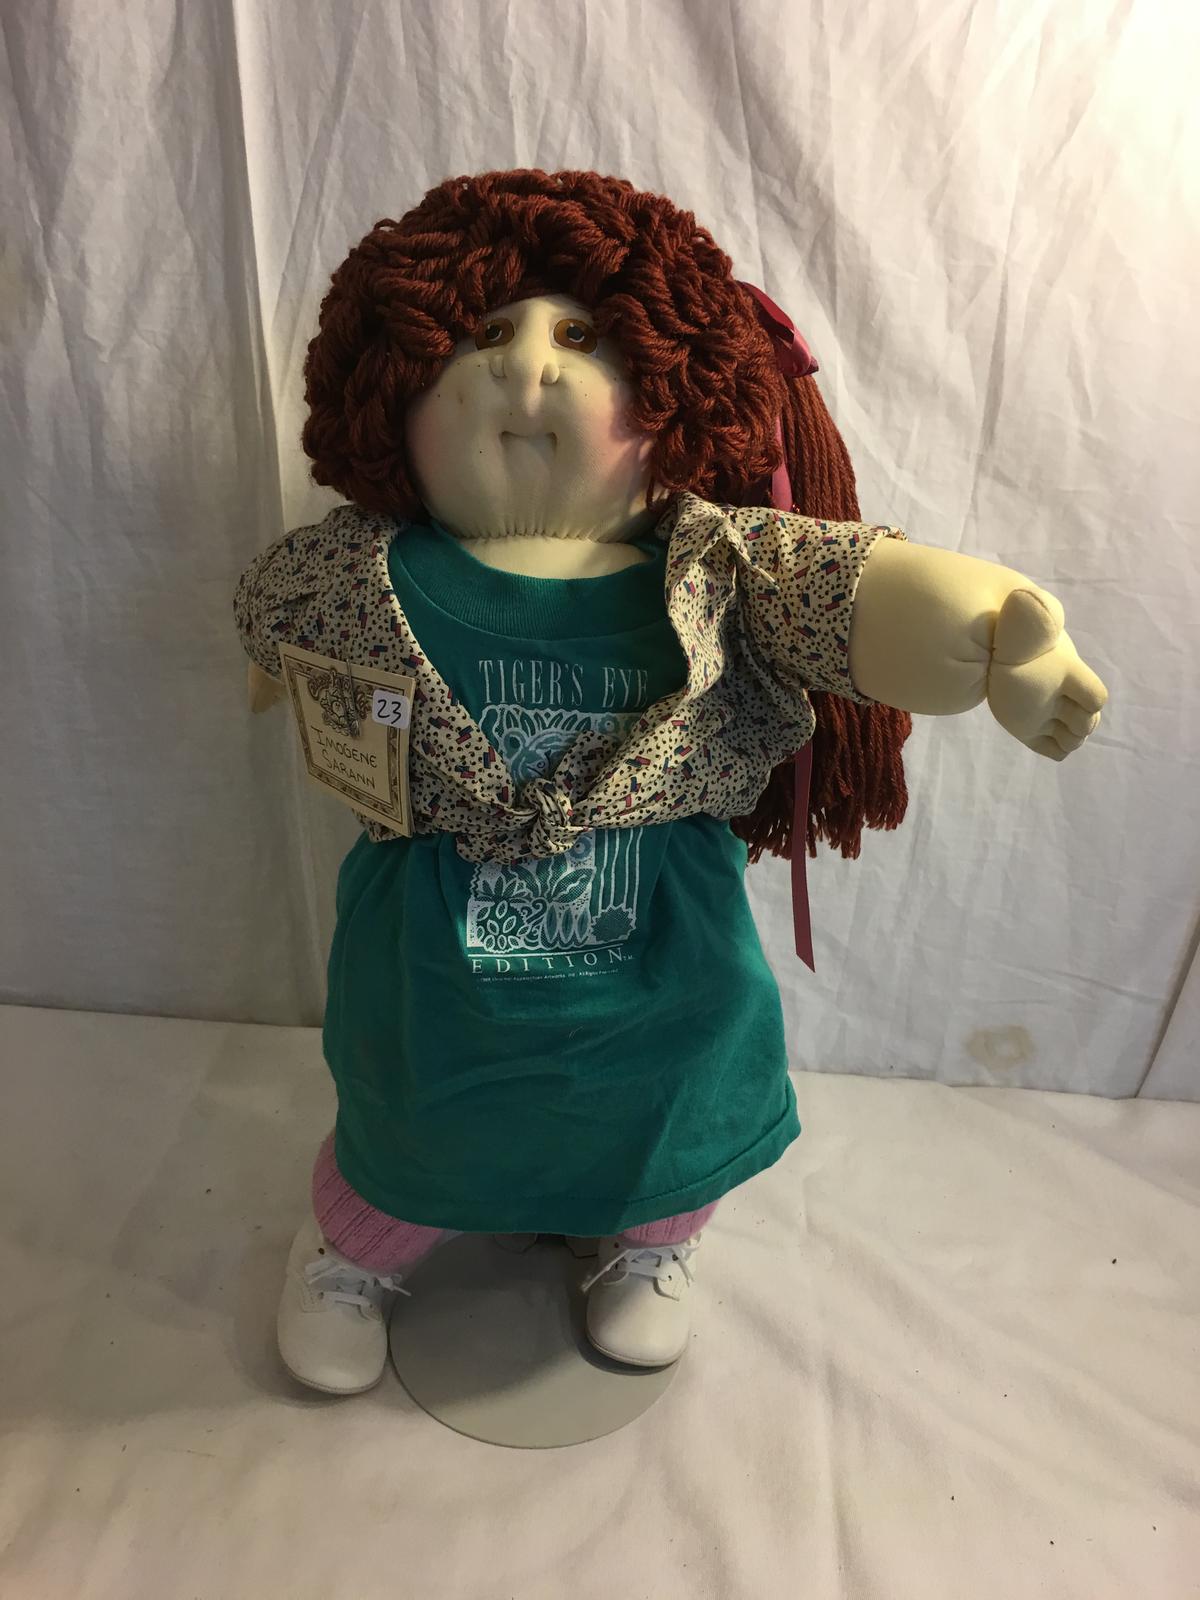 Collector Loose Vintage 1988 Original Cabbage Patch Kids Doll "Imogene Sarann" Size:23"tall